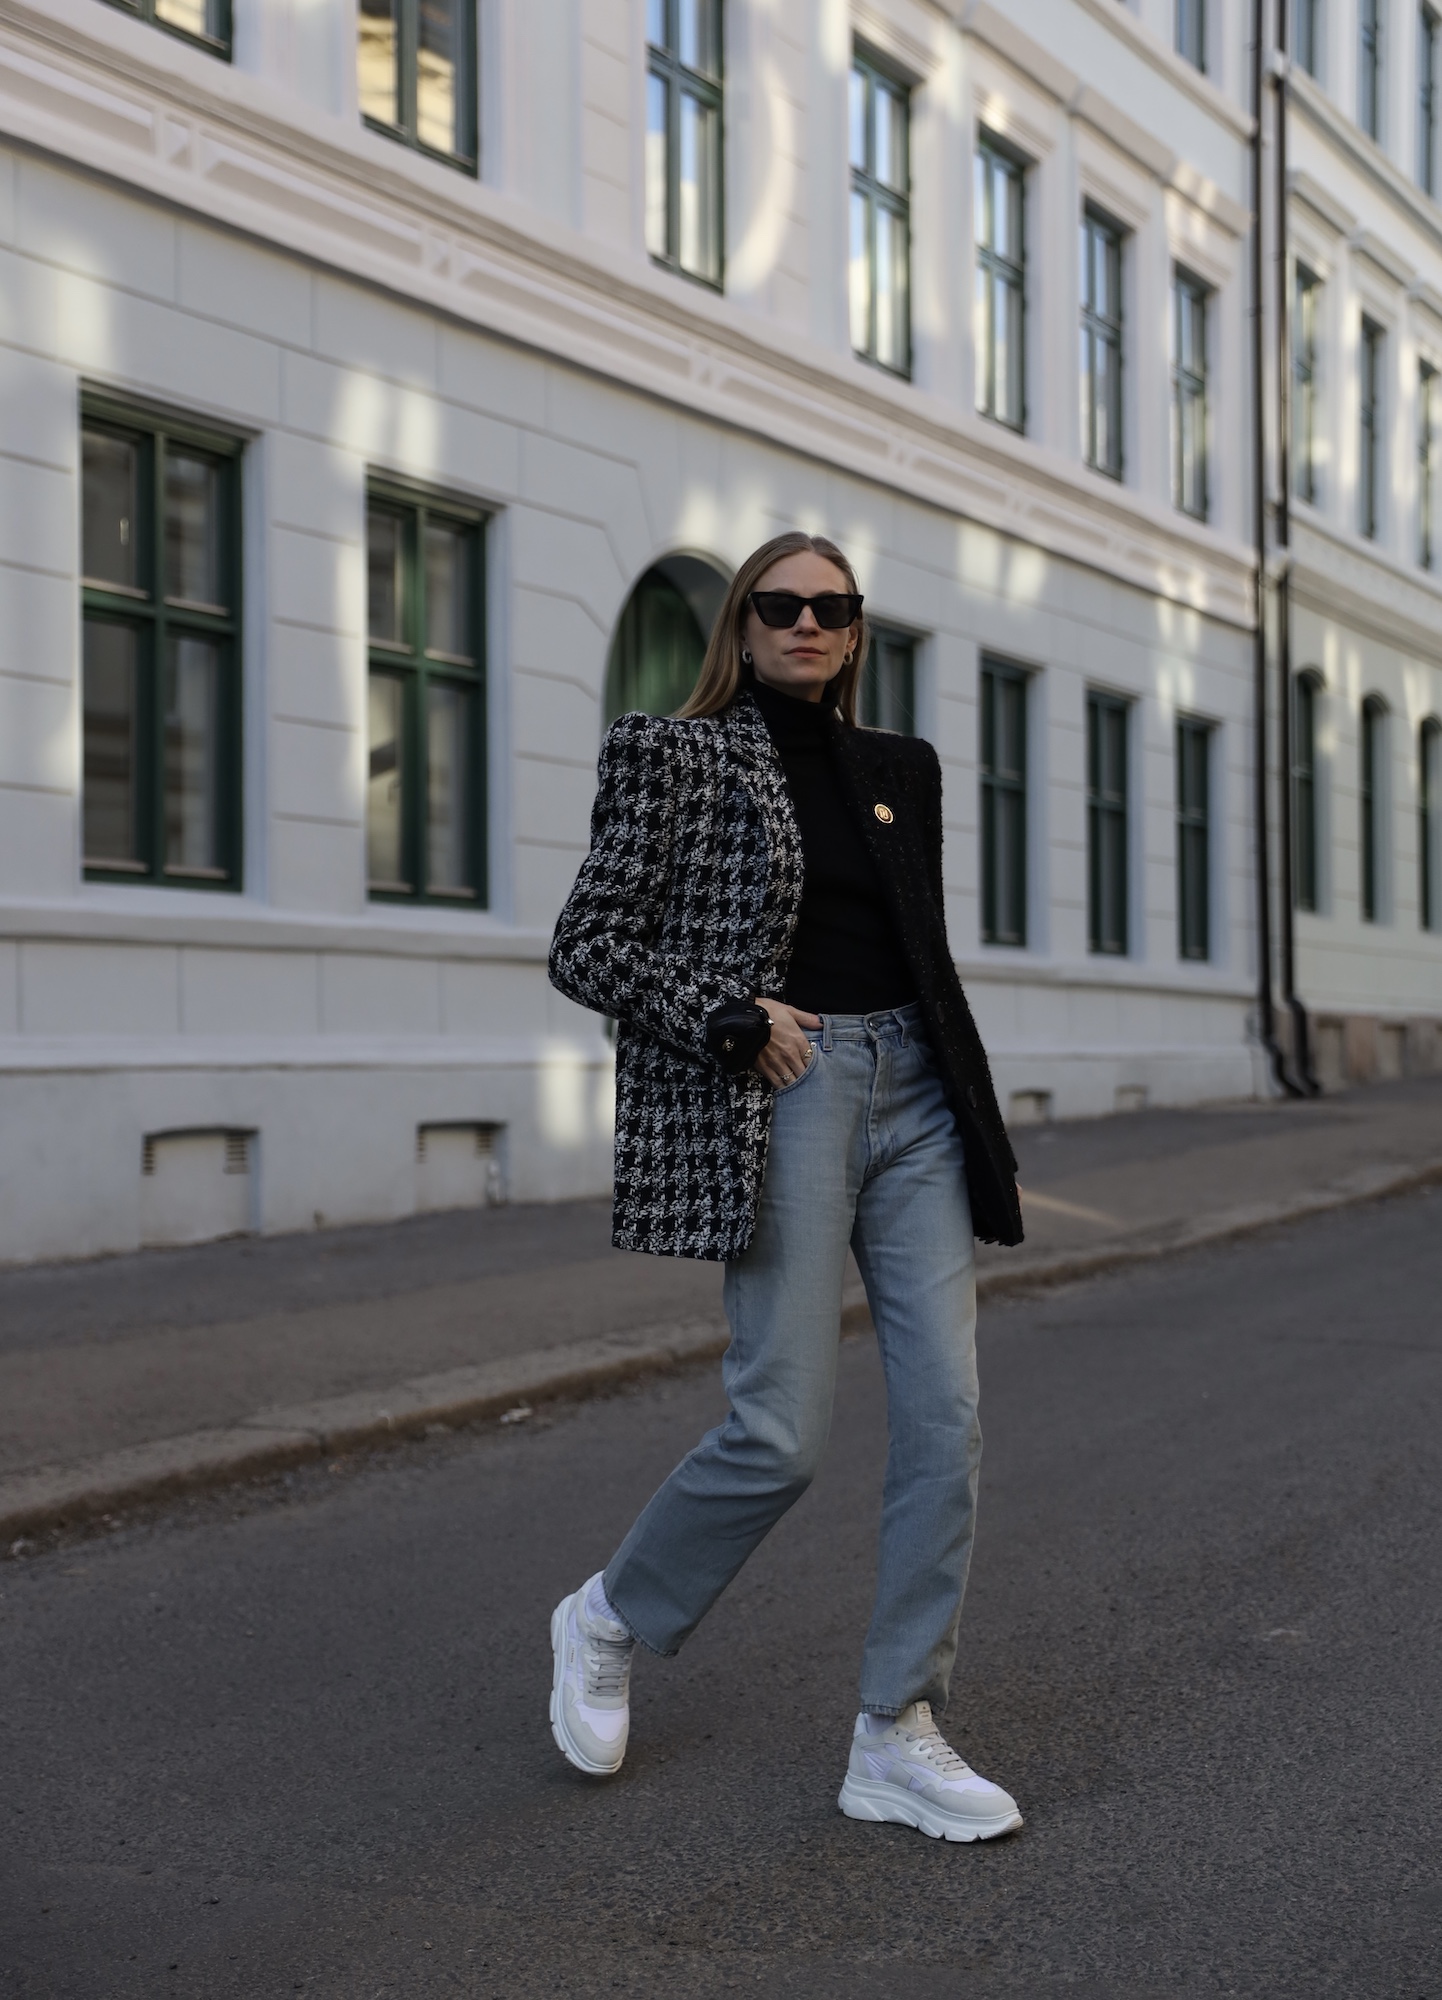 @tineandreaa styled her CPH51 material mix white with a pair of simple straight jeans and a black turtleneck. She paired it with a bold oversized blazer with an elegant houndstooth pattern.